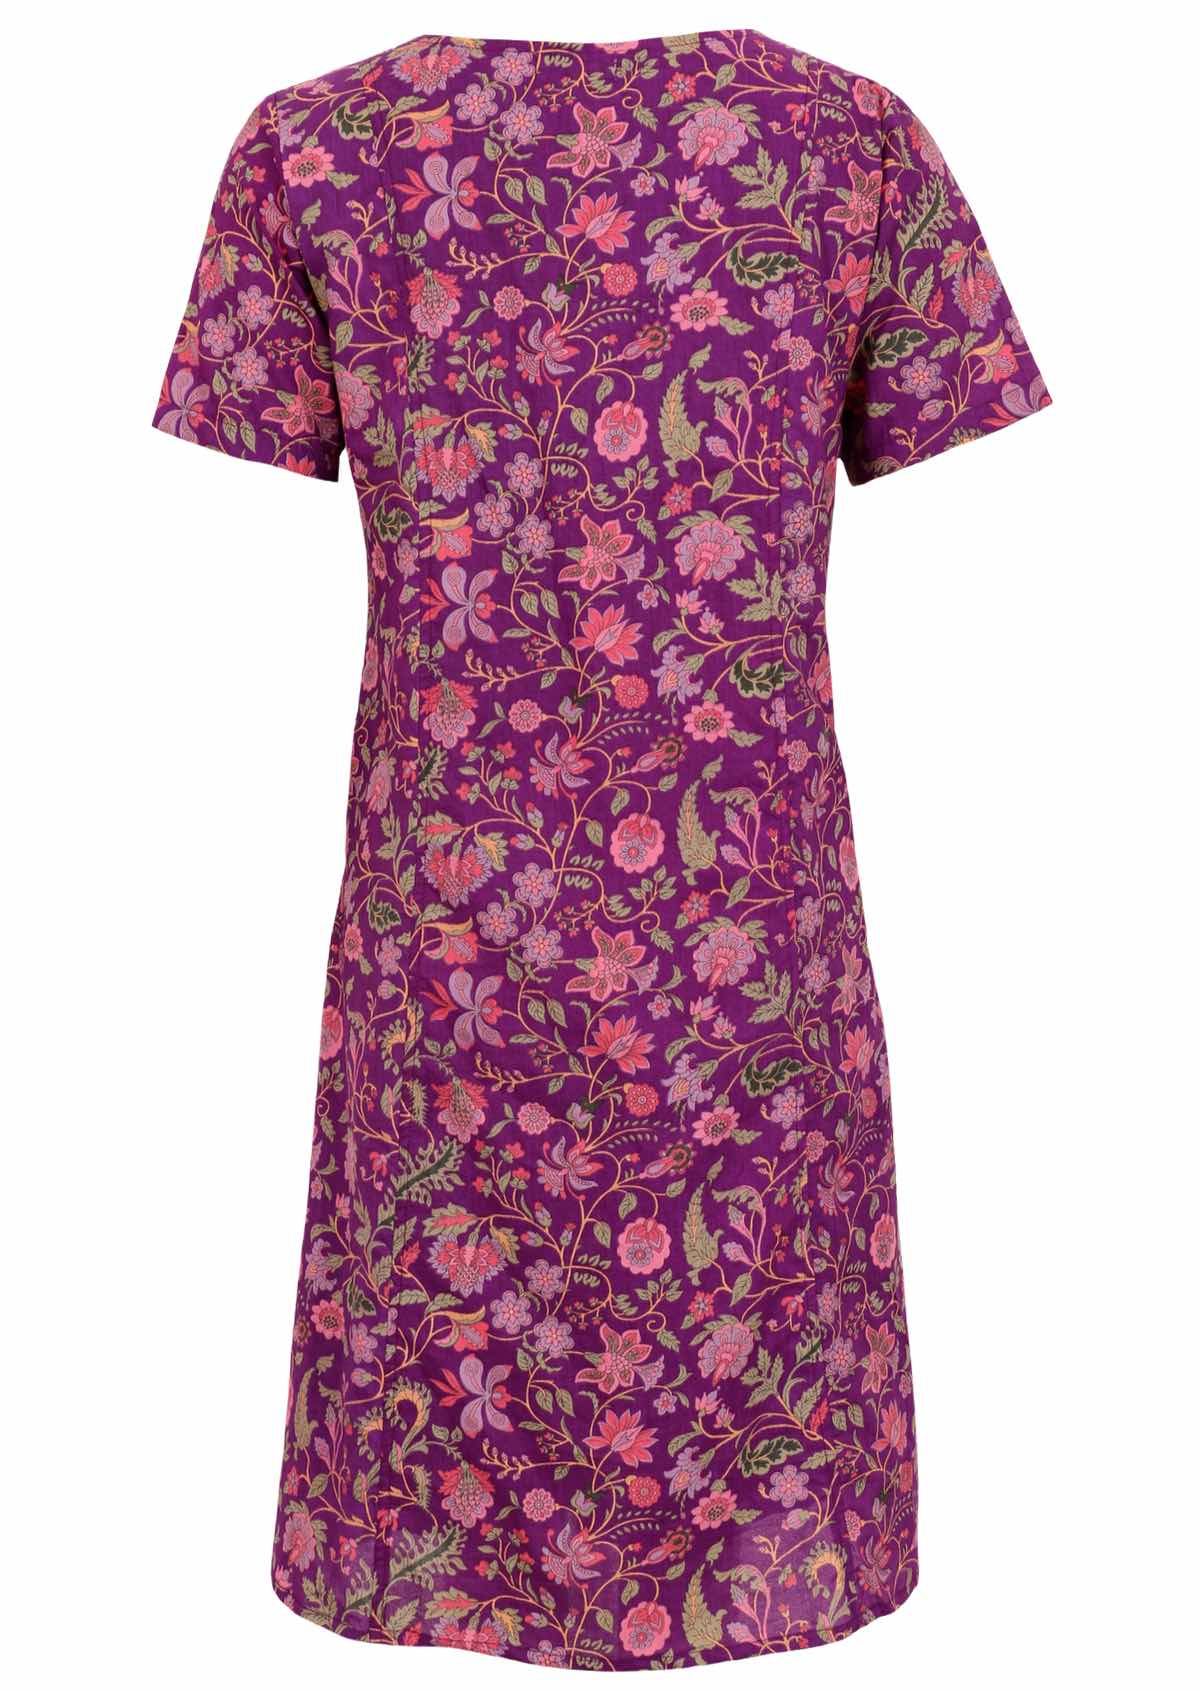 Relaxed fit cotton floral print dress